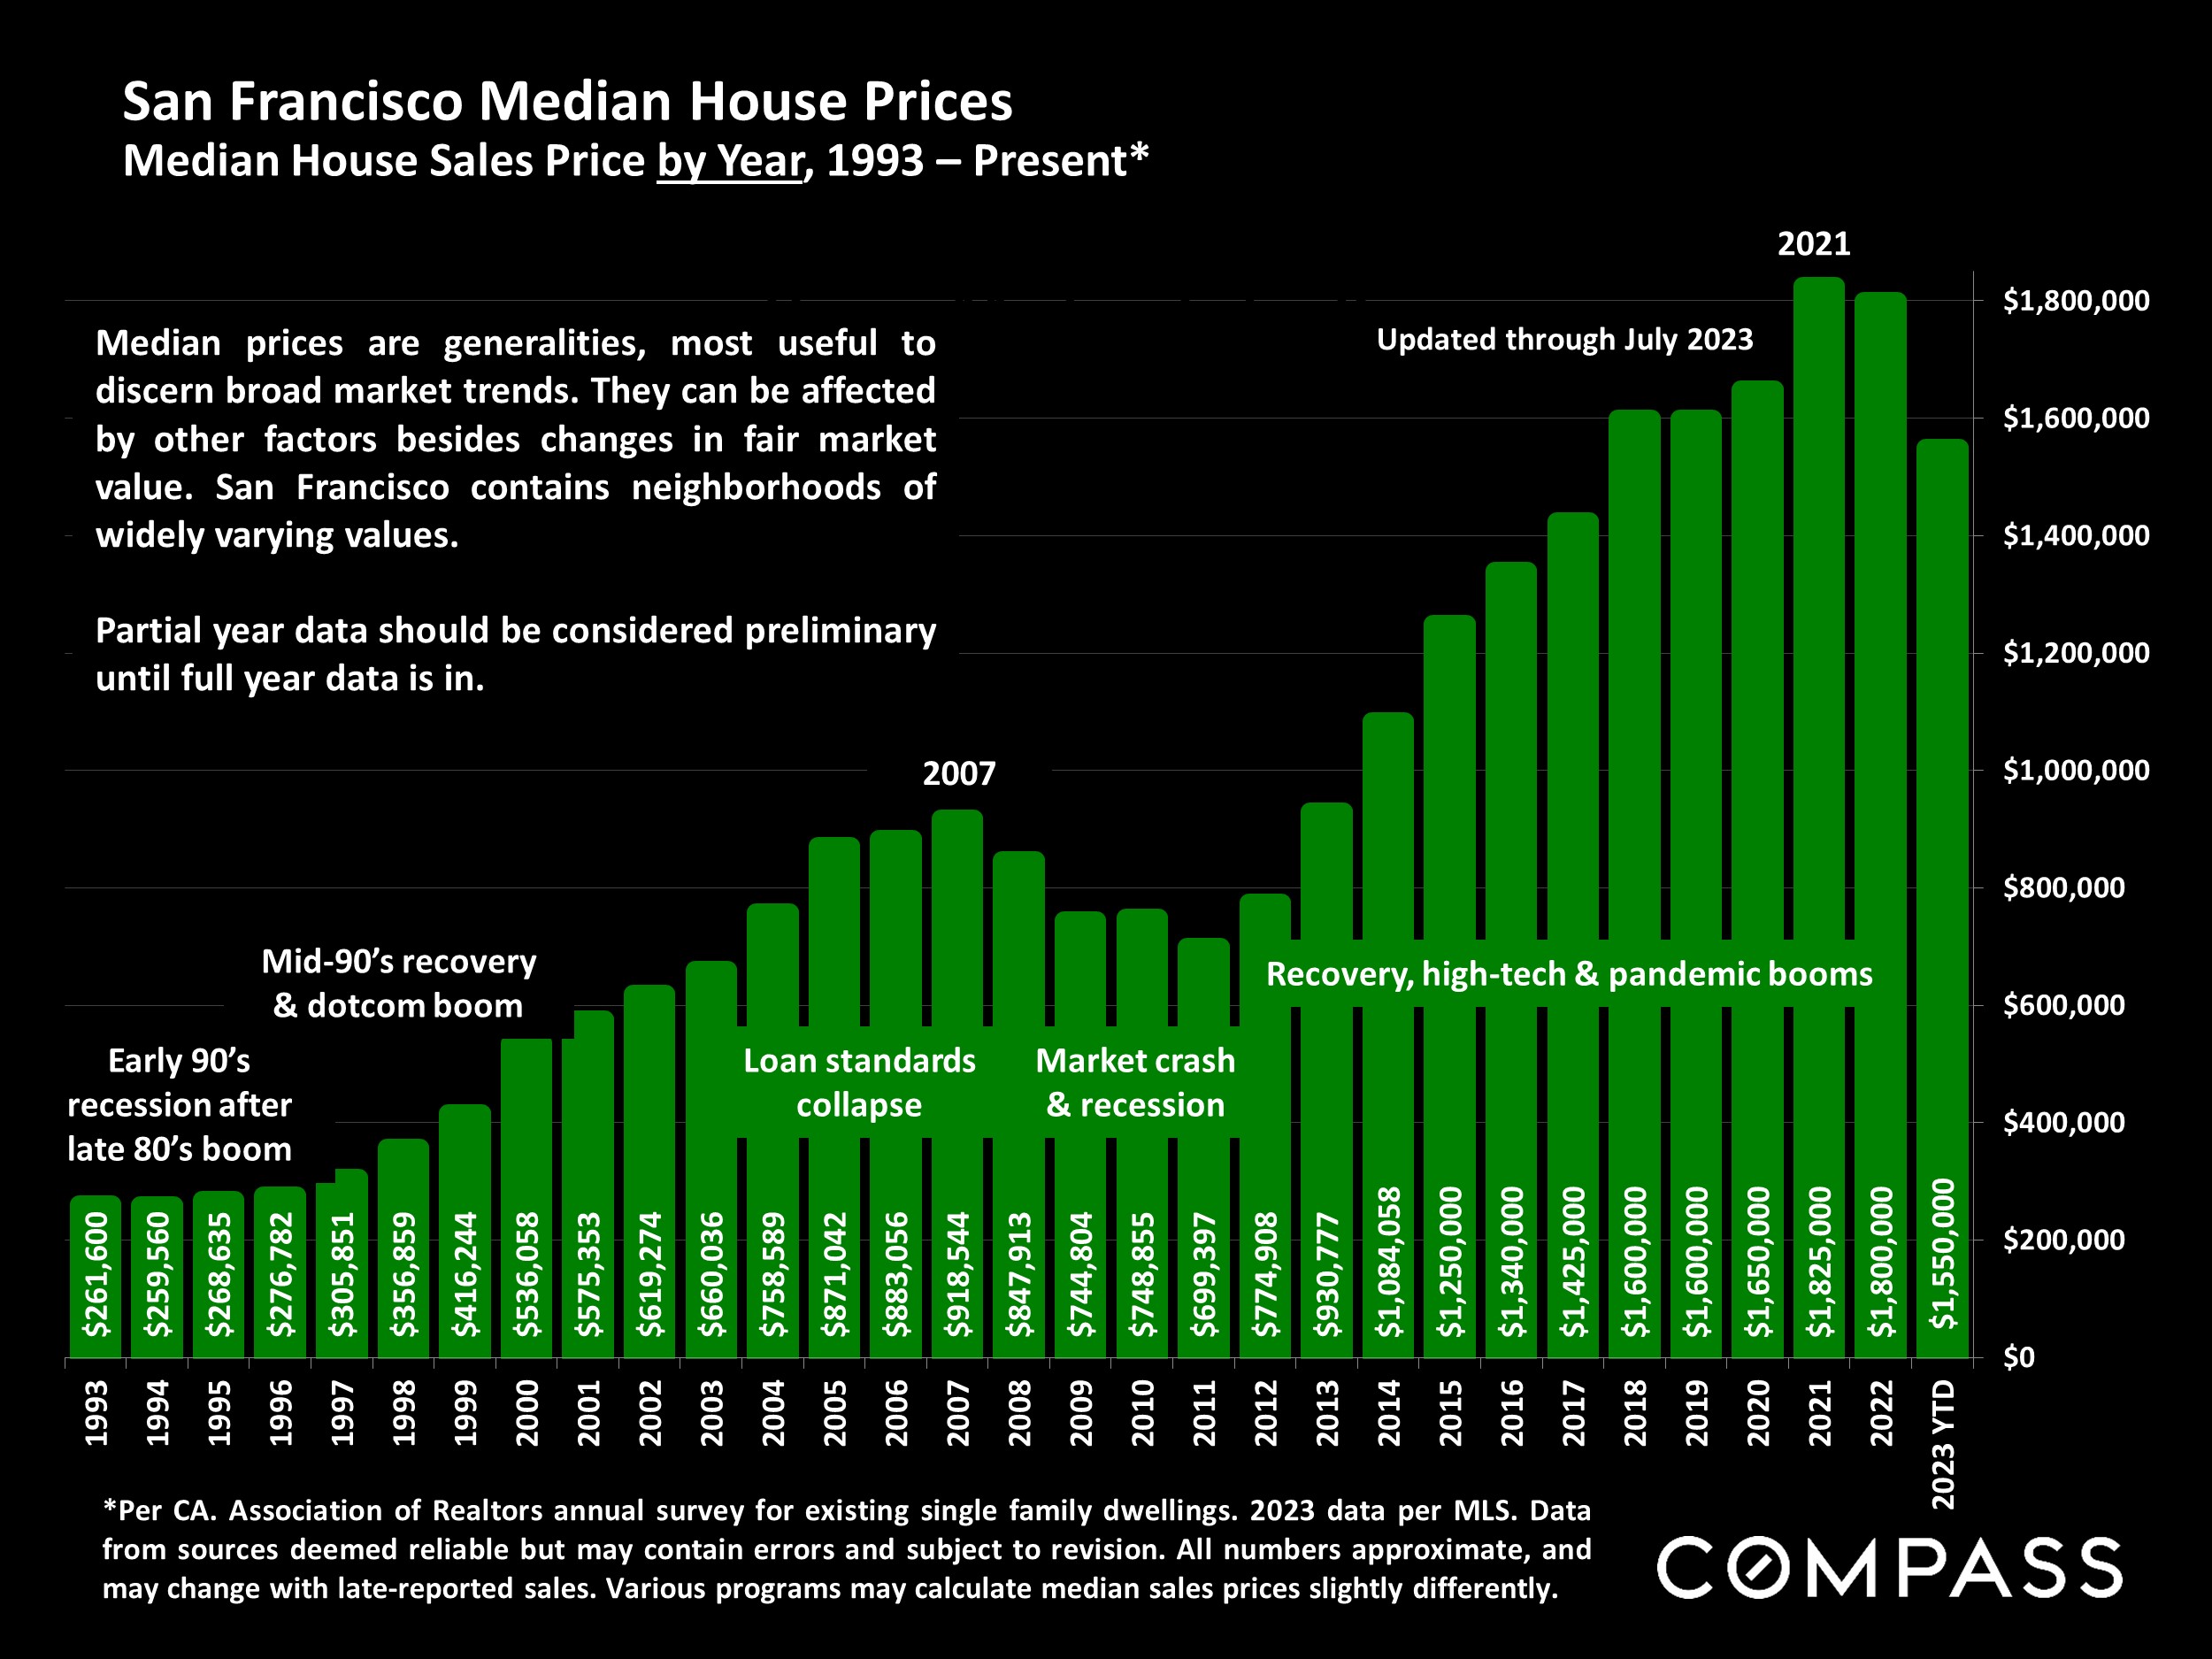 San Francisco Median House Prices Median House Sales Price by Year, 1993 - Present*